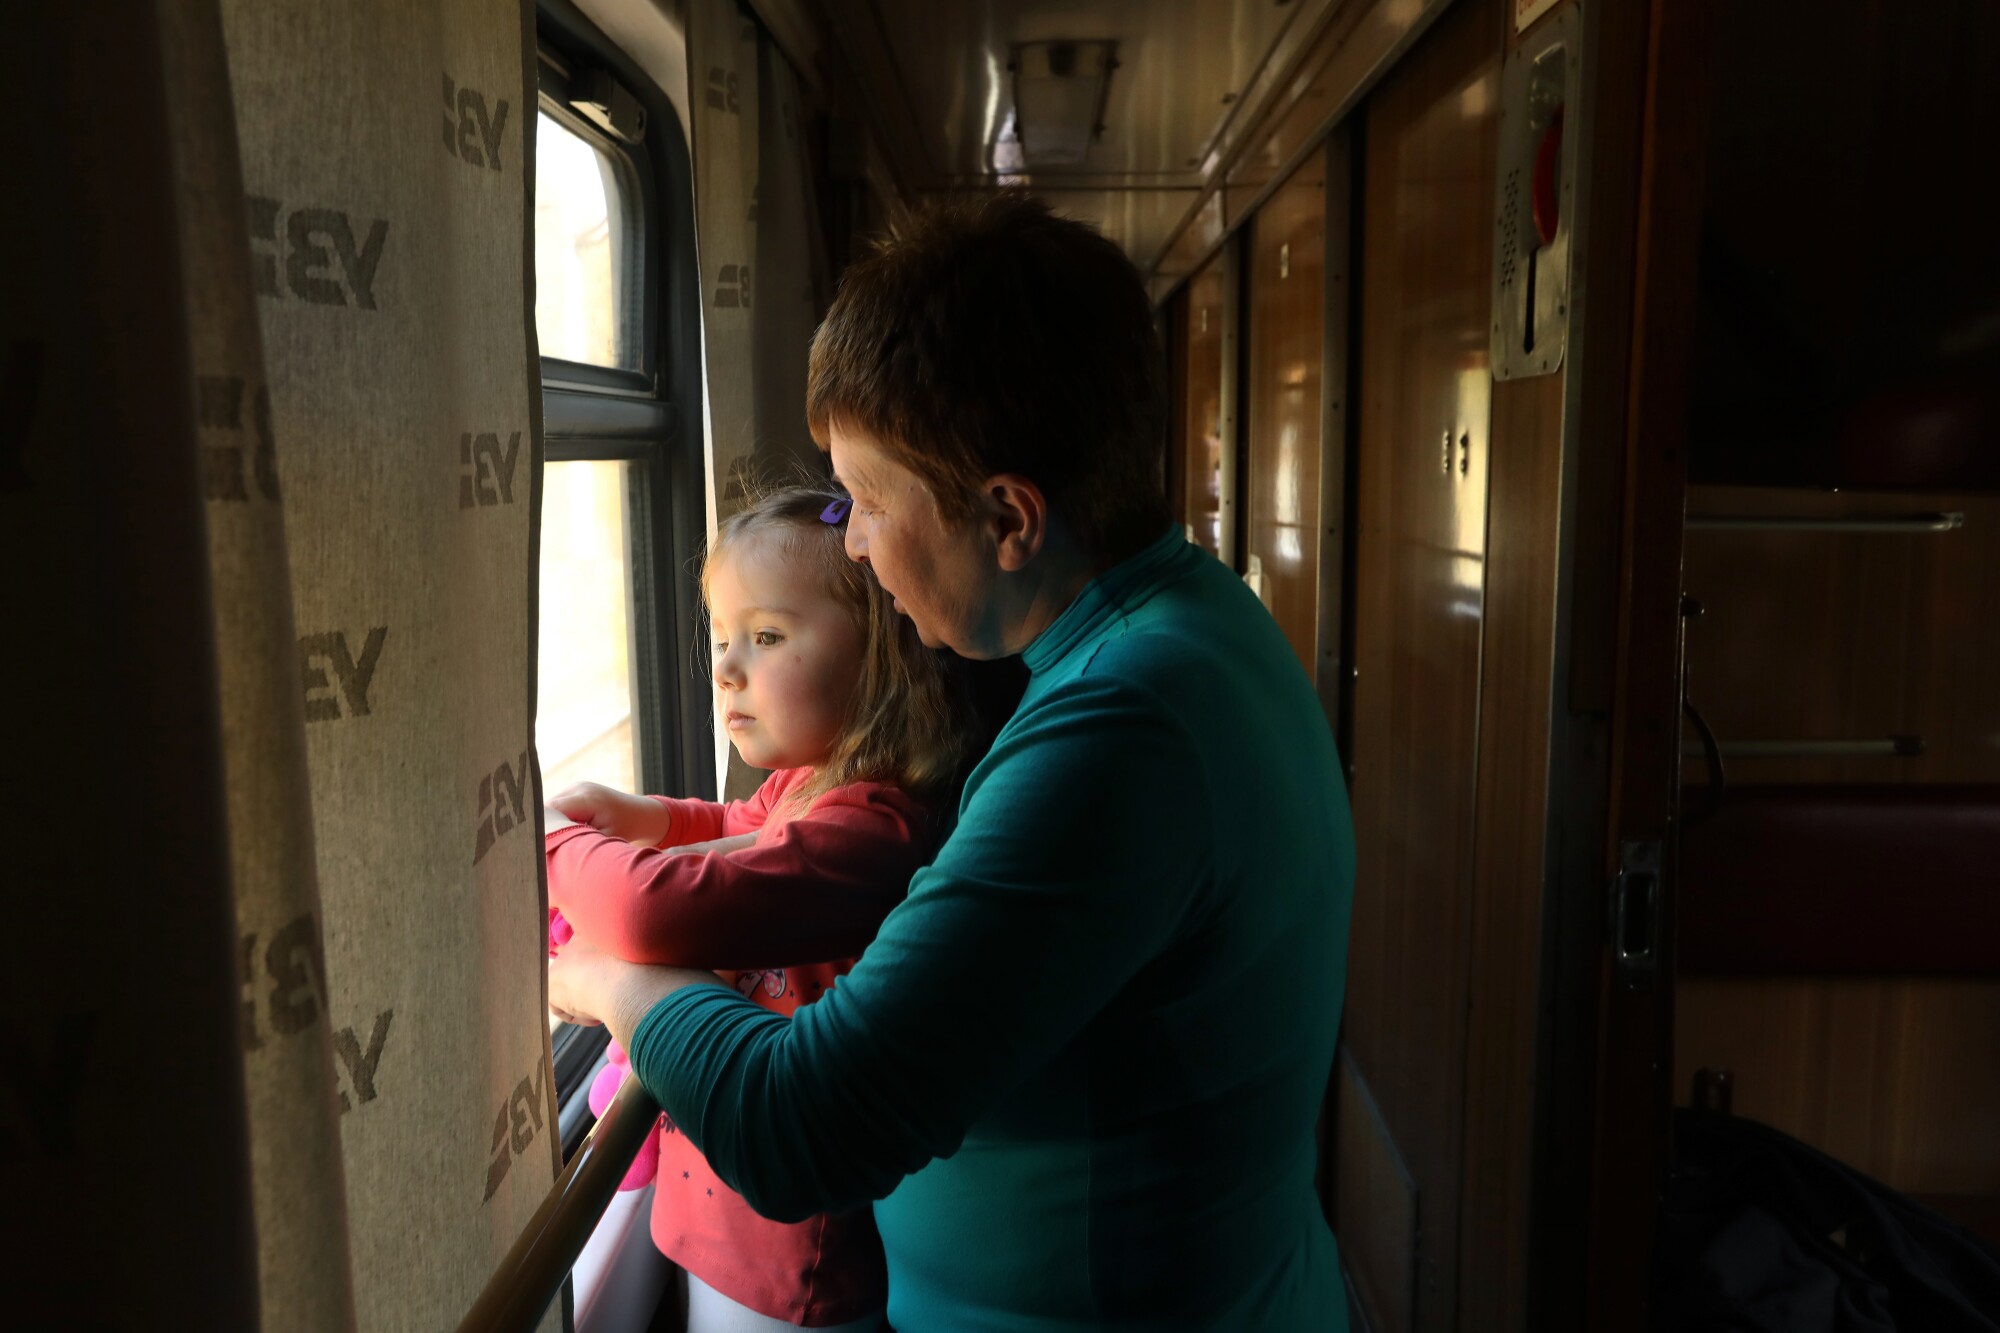 A woman in a green top and a young girl in a pink shirt in front of her look out a window 